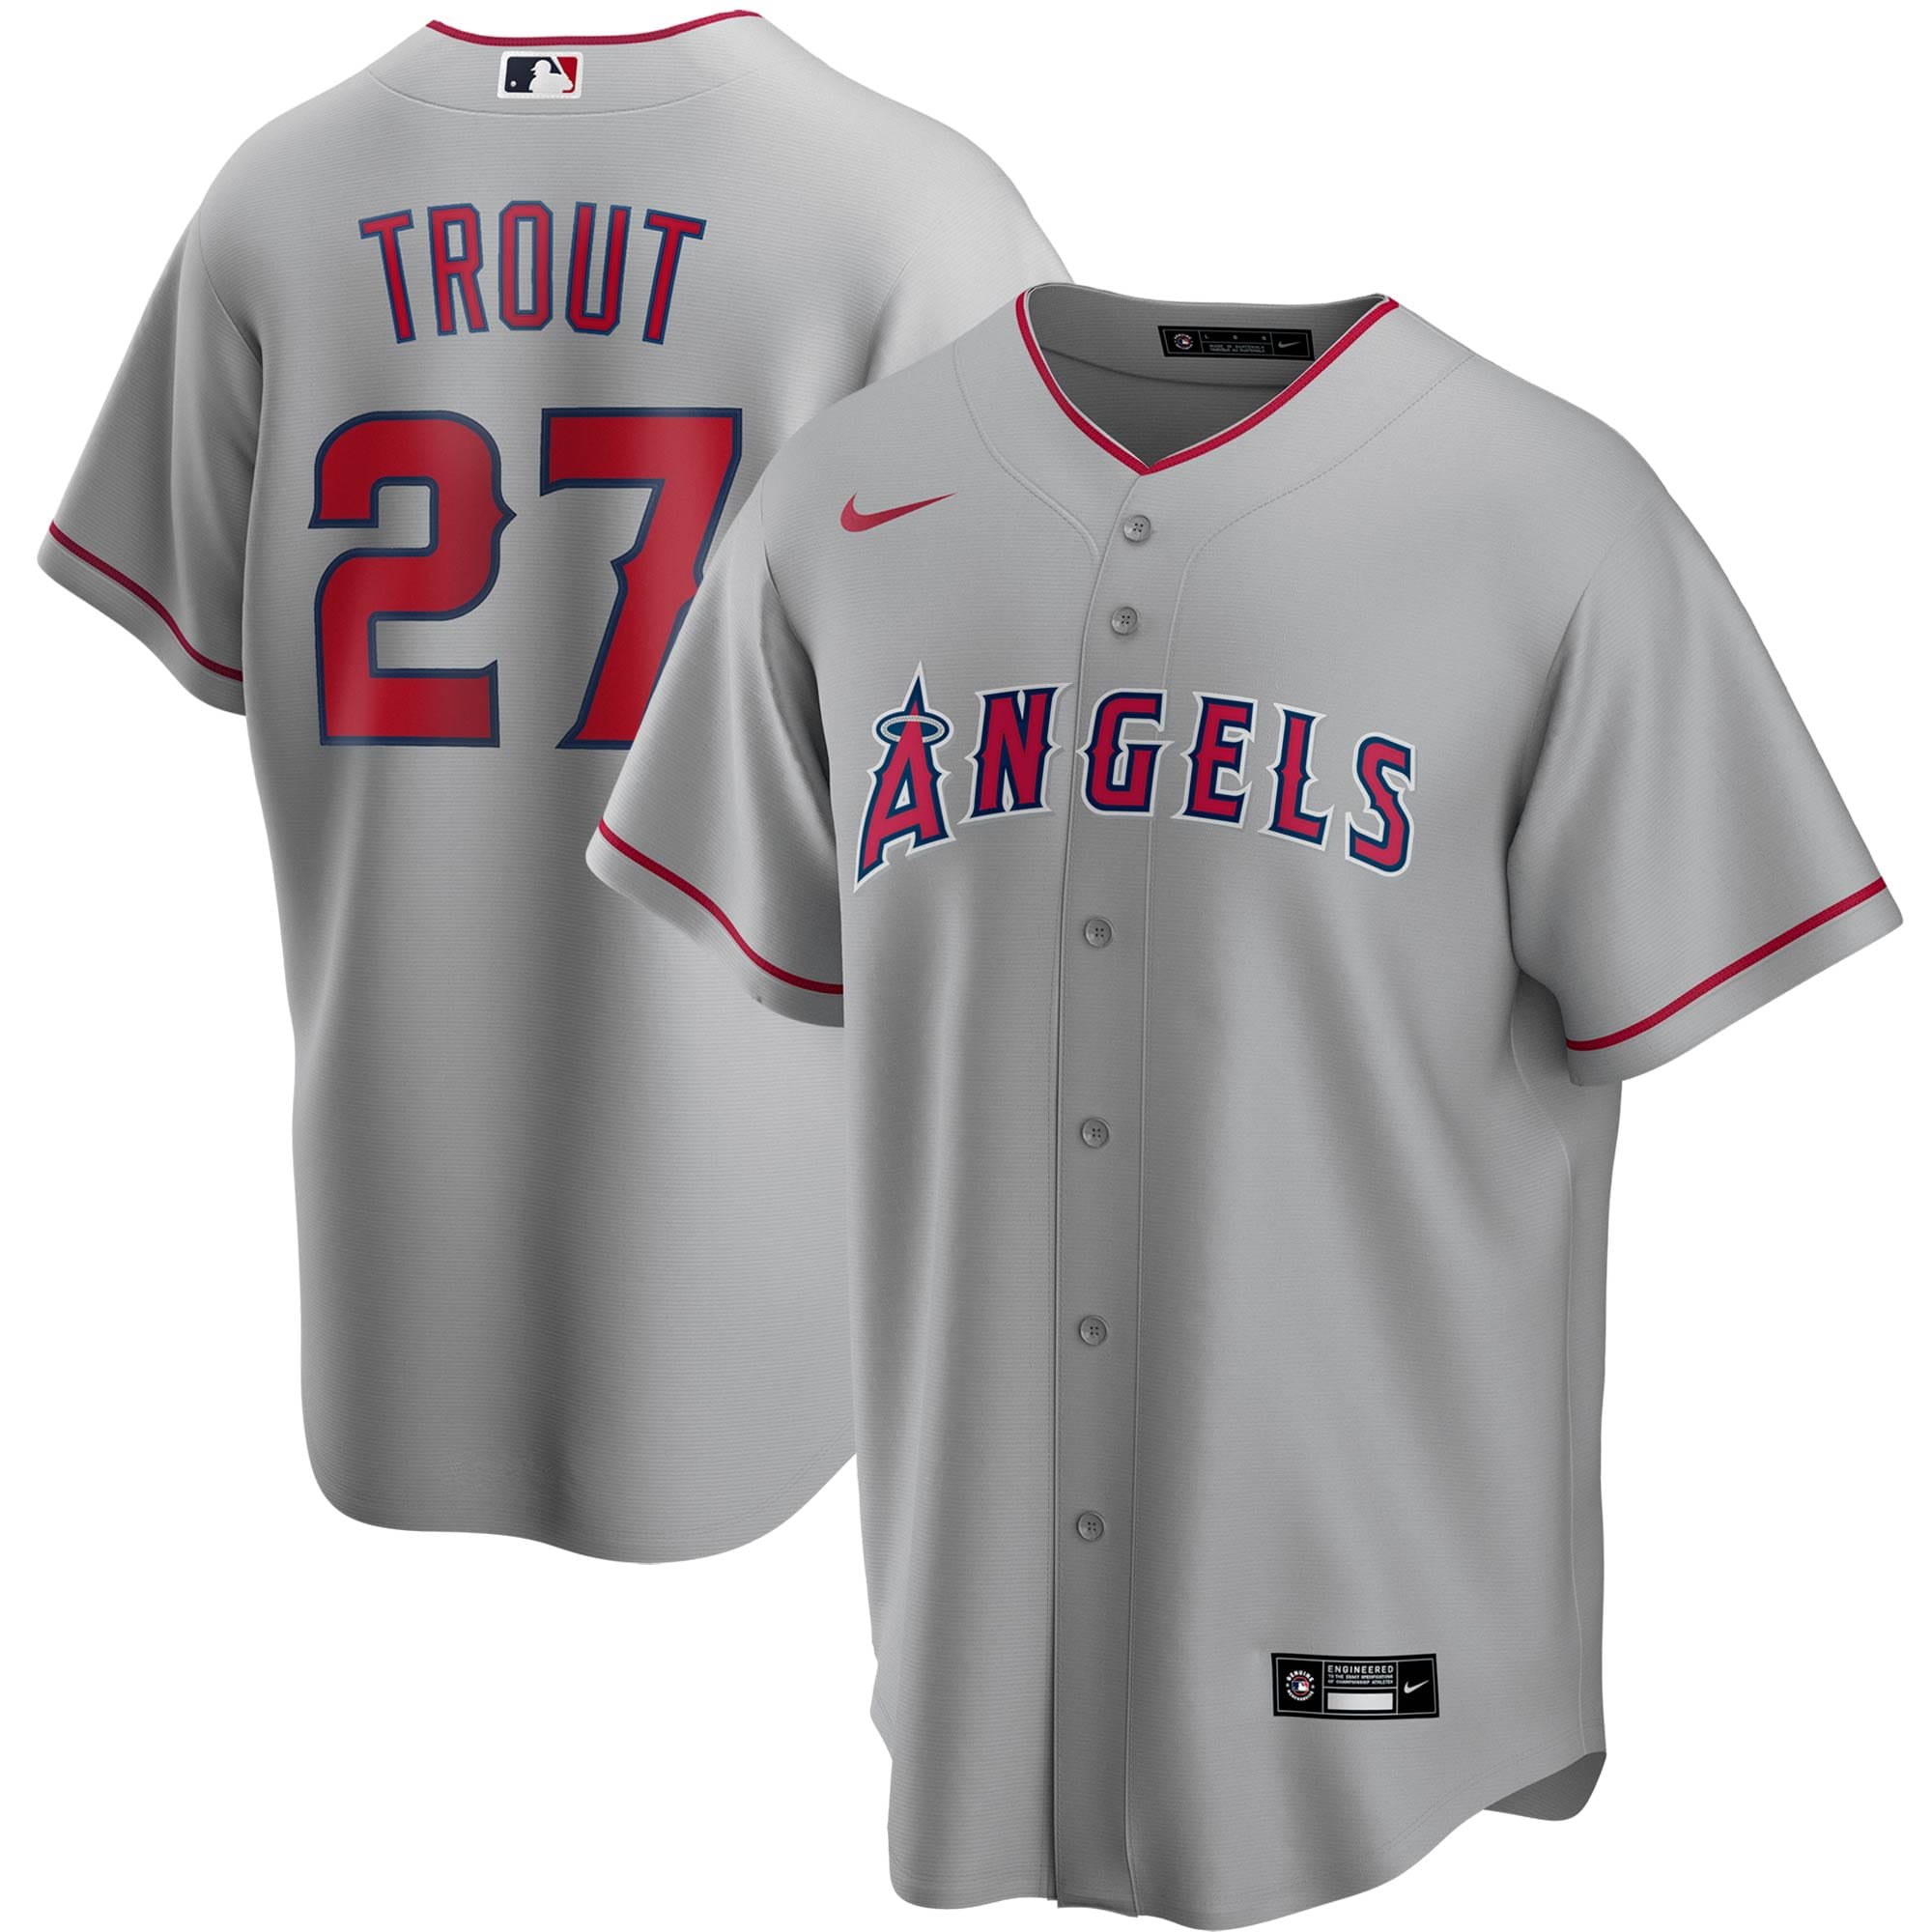 mike trout jersey shirt